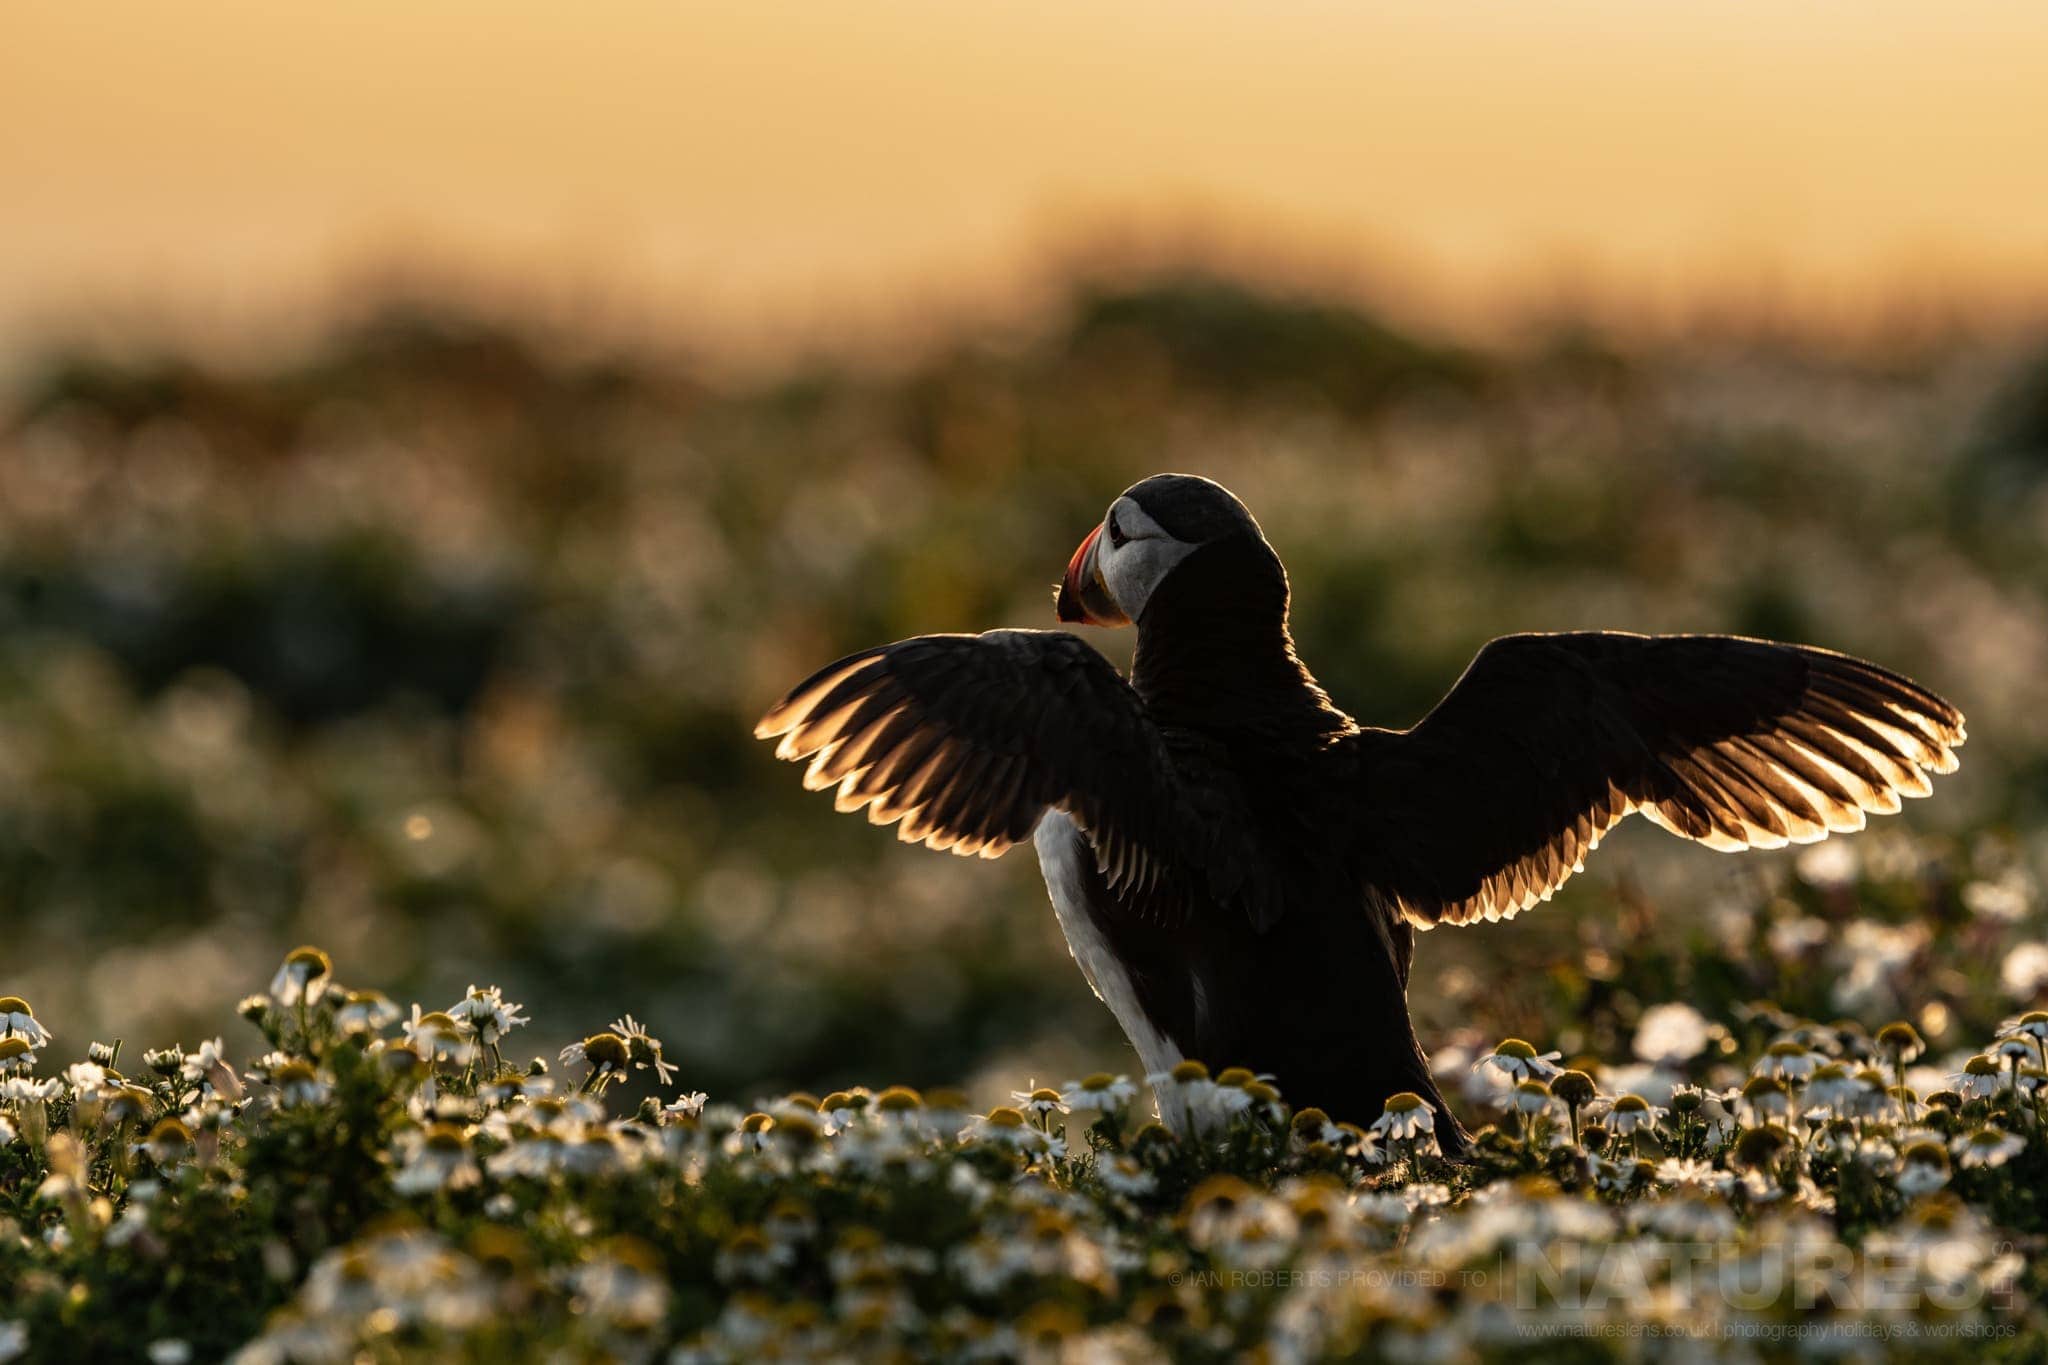 A Puffin Stretches It'S Wings, Illuminated From Behind By The Light Of The Rising Sun This Image Was Captured By Ian Roberts During The Natureslens Welsh Puffins Of Skomer Island Photography Holiday